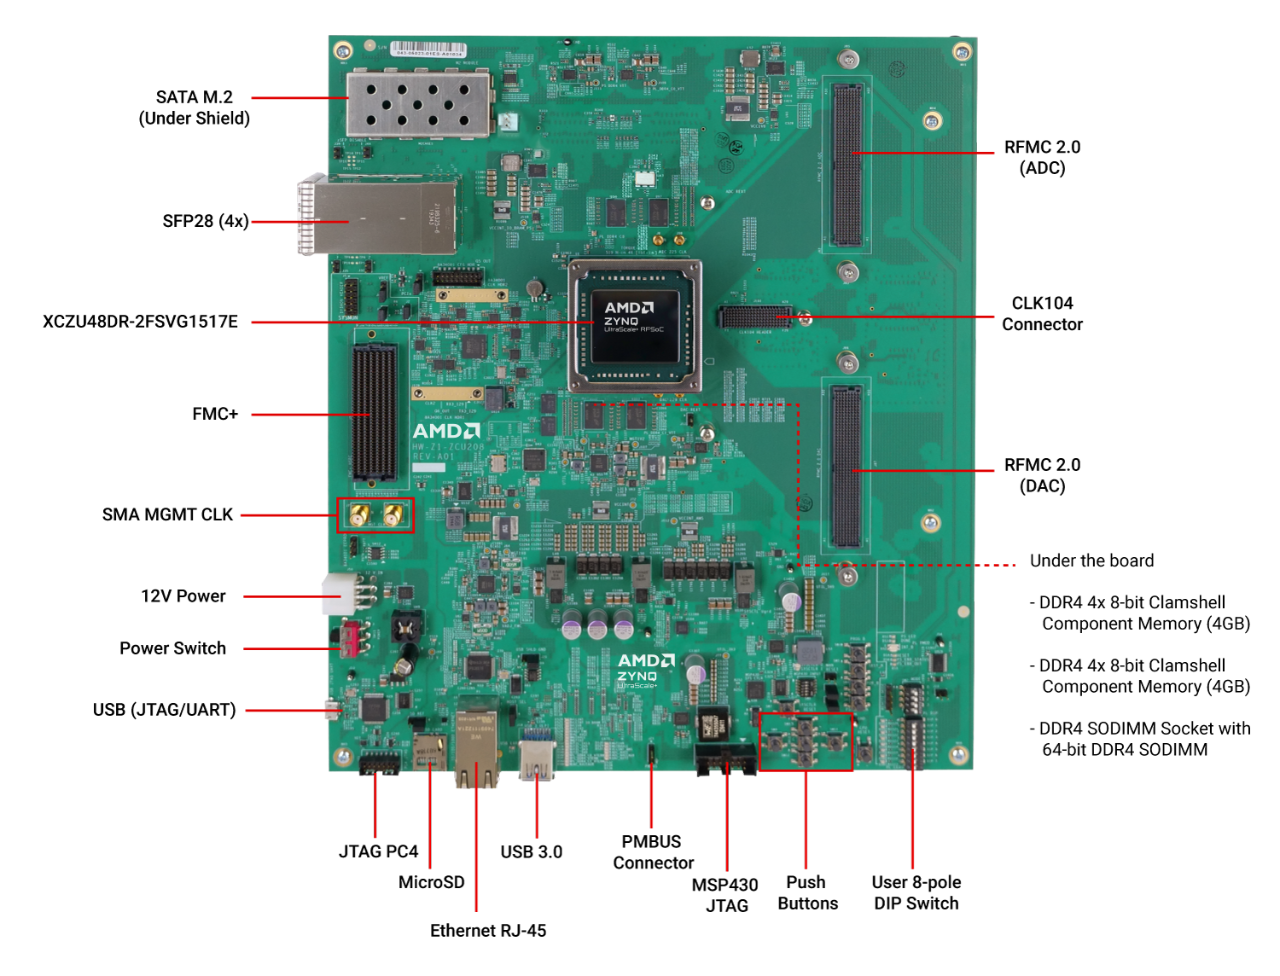 Zynq UltraScale+ RFSoC ZCU208 ES1 Evaluation Kit Board Callout